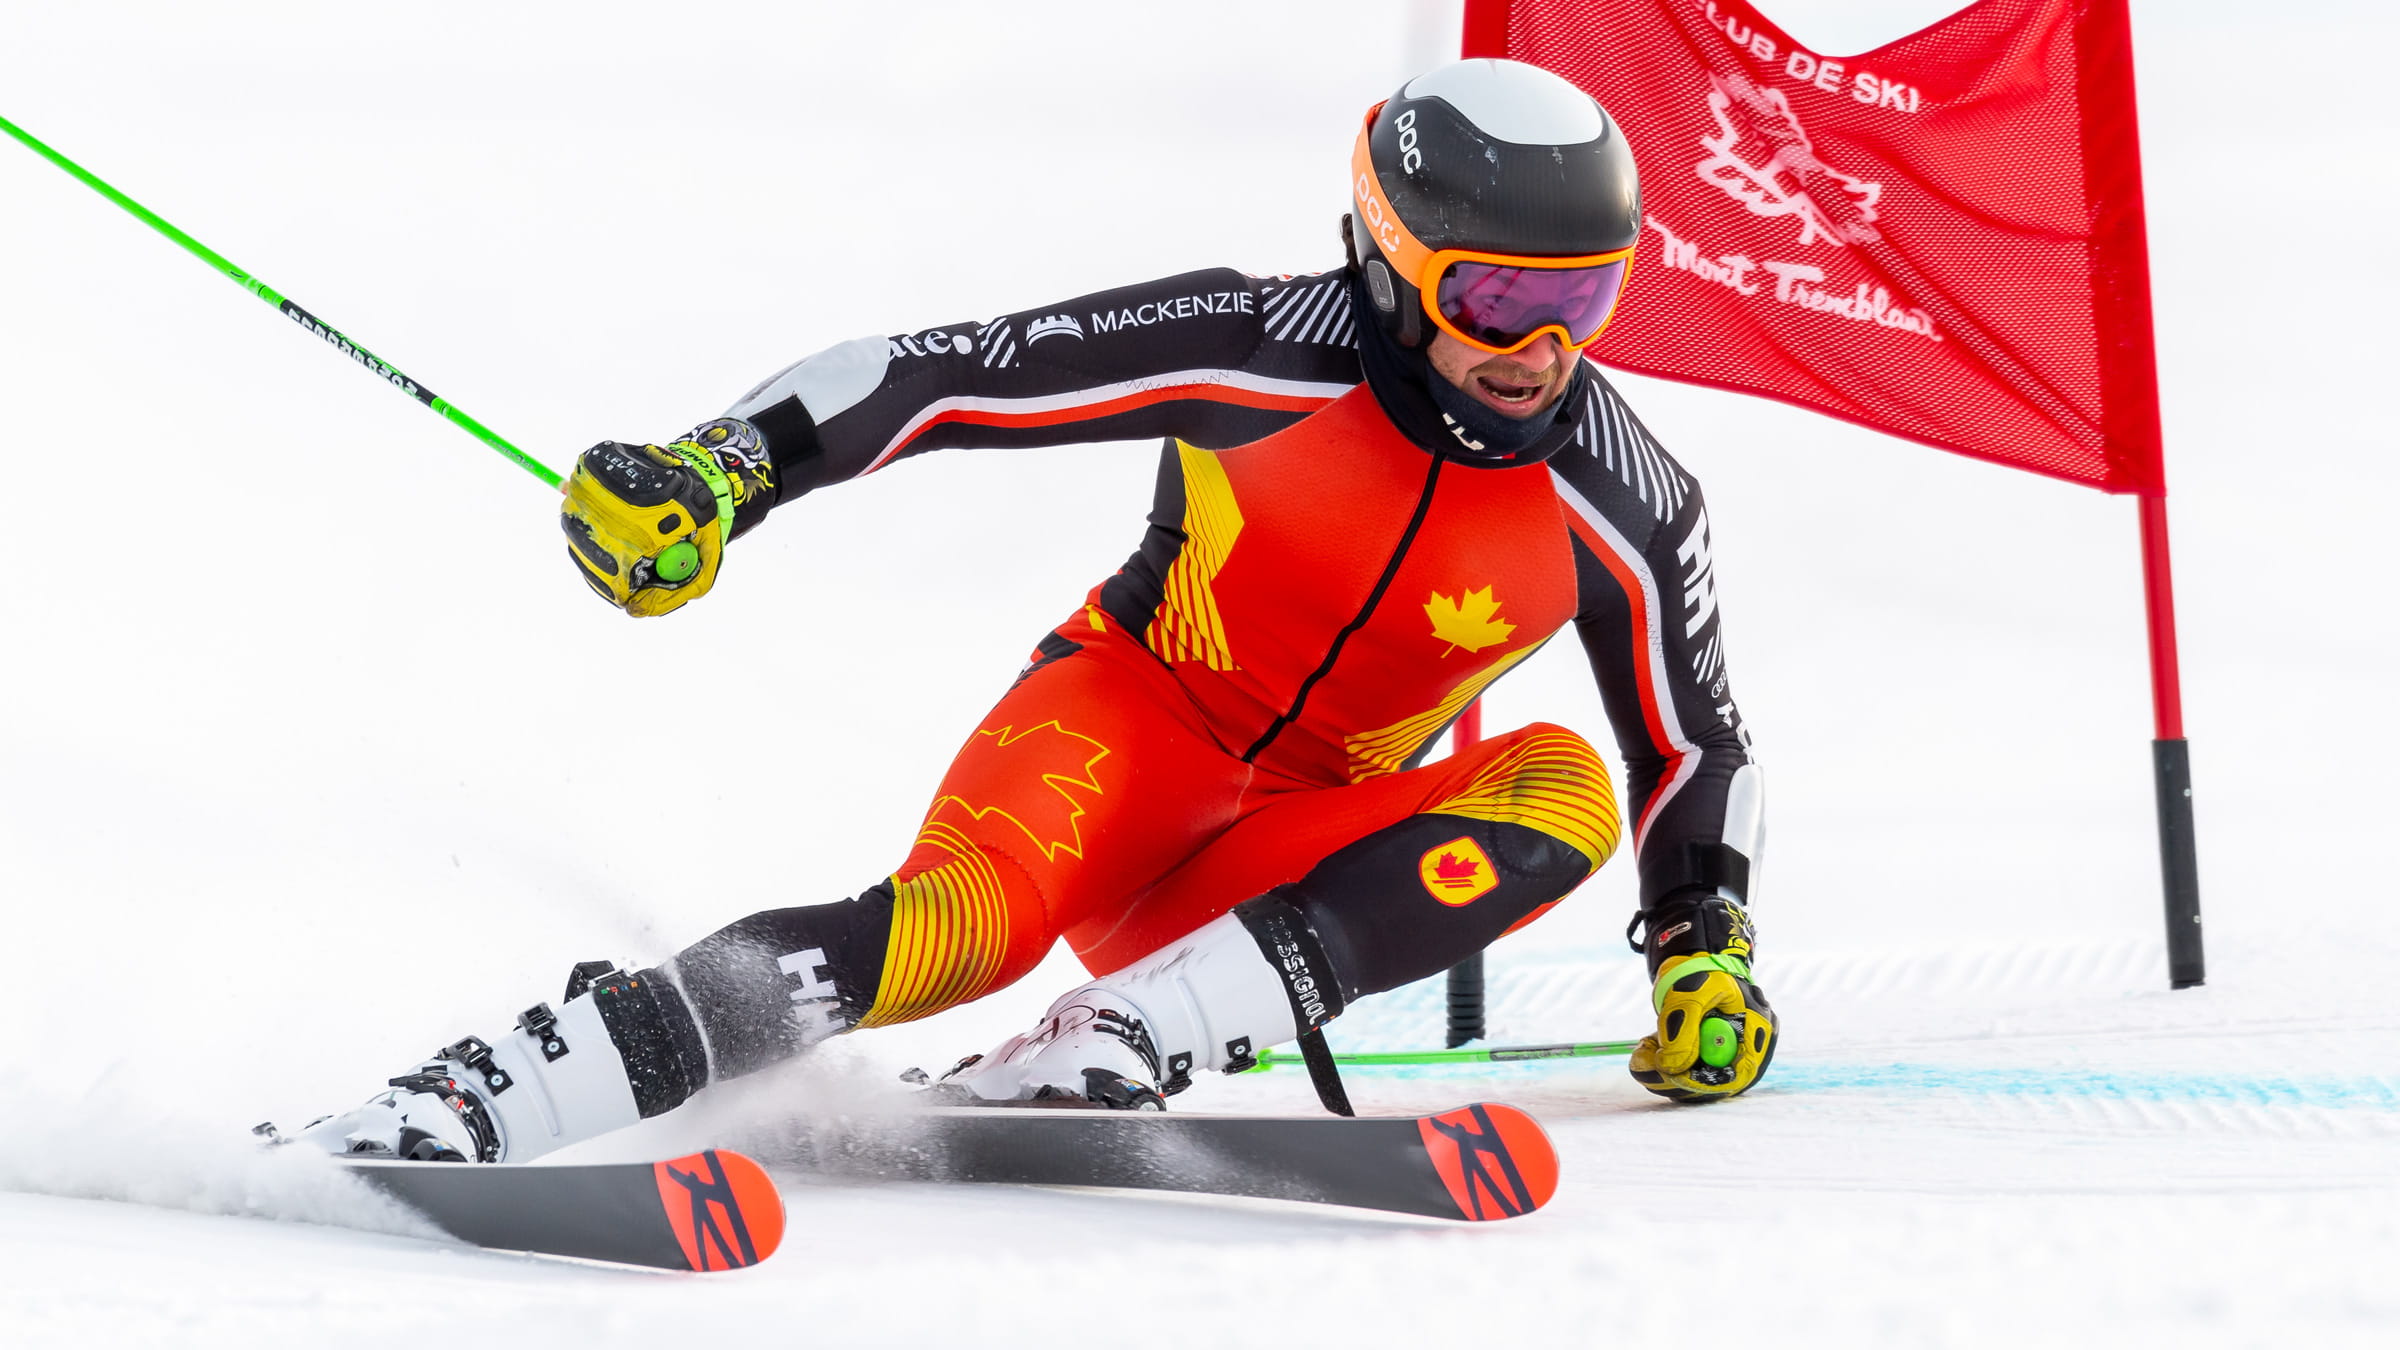 FIS Alpine Skiing Nor-Am Cup Tremblant